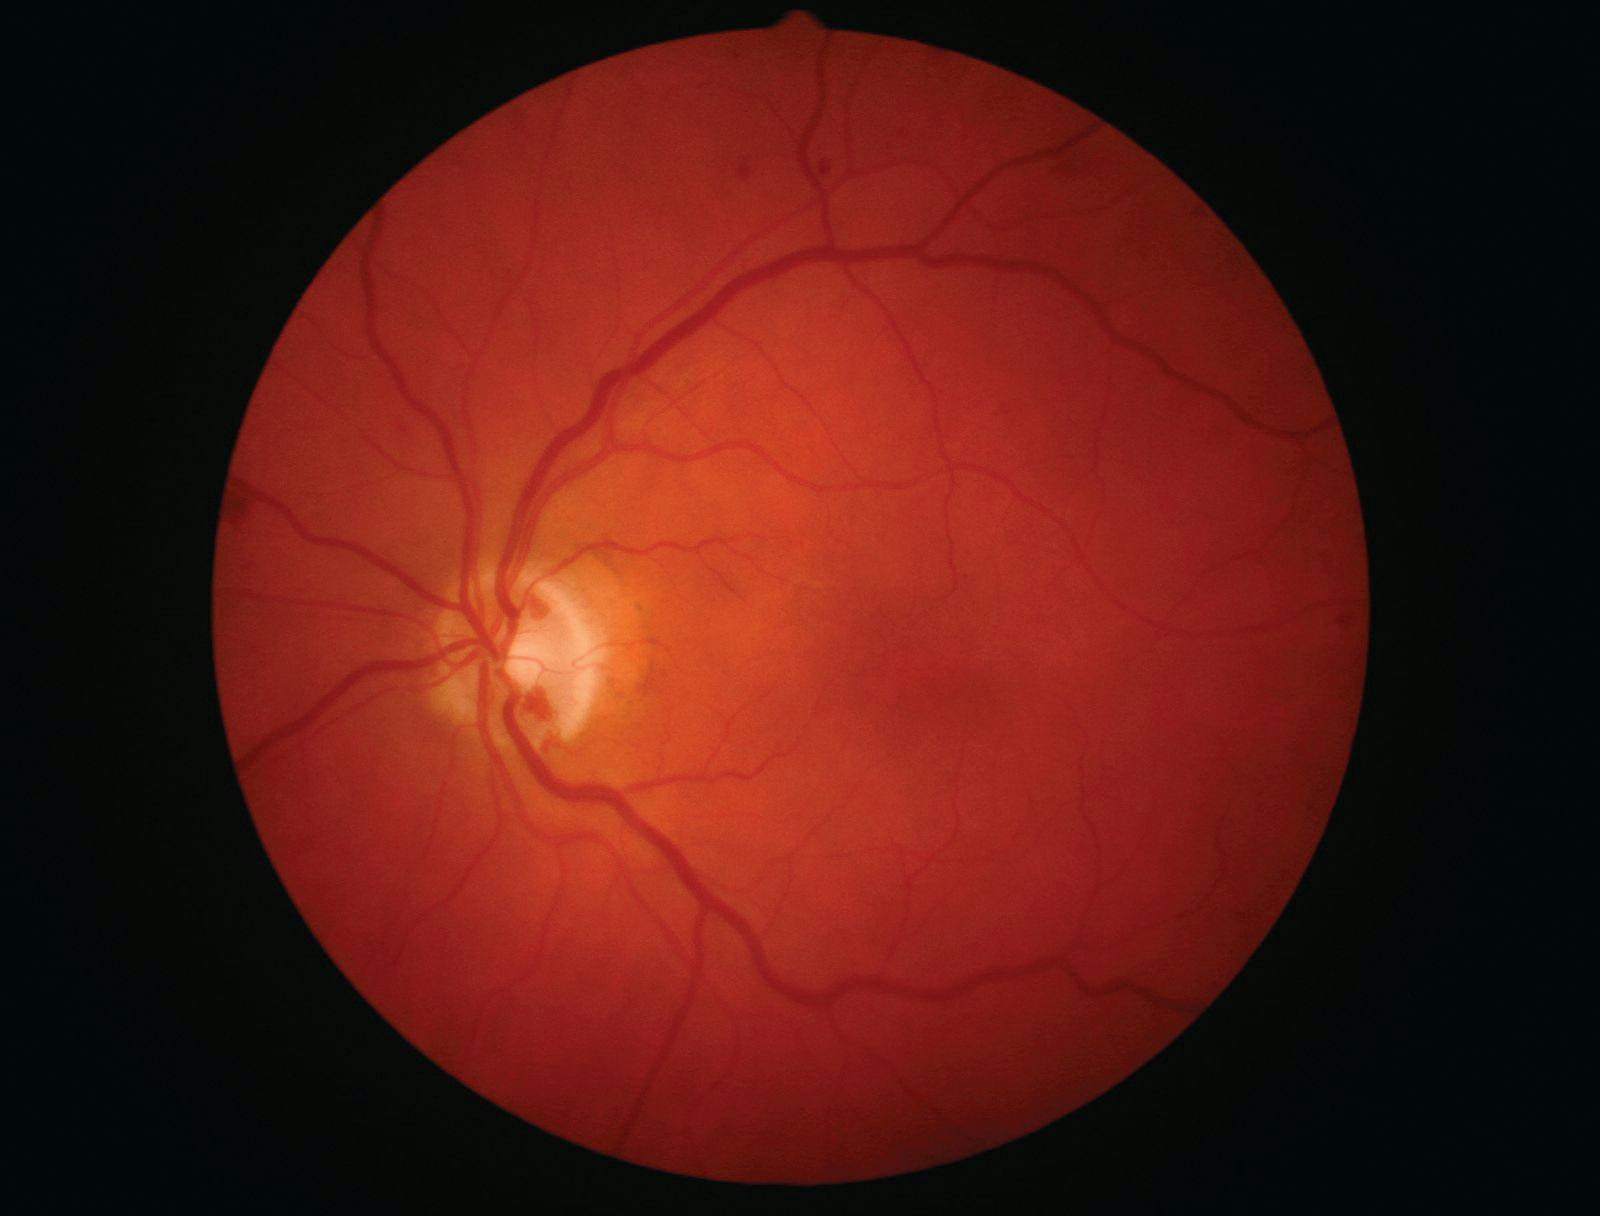 Image of retina taken from patieent with proliferative diabetic retinopathy